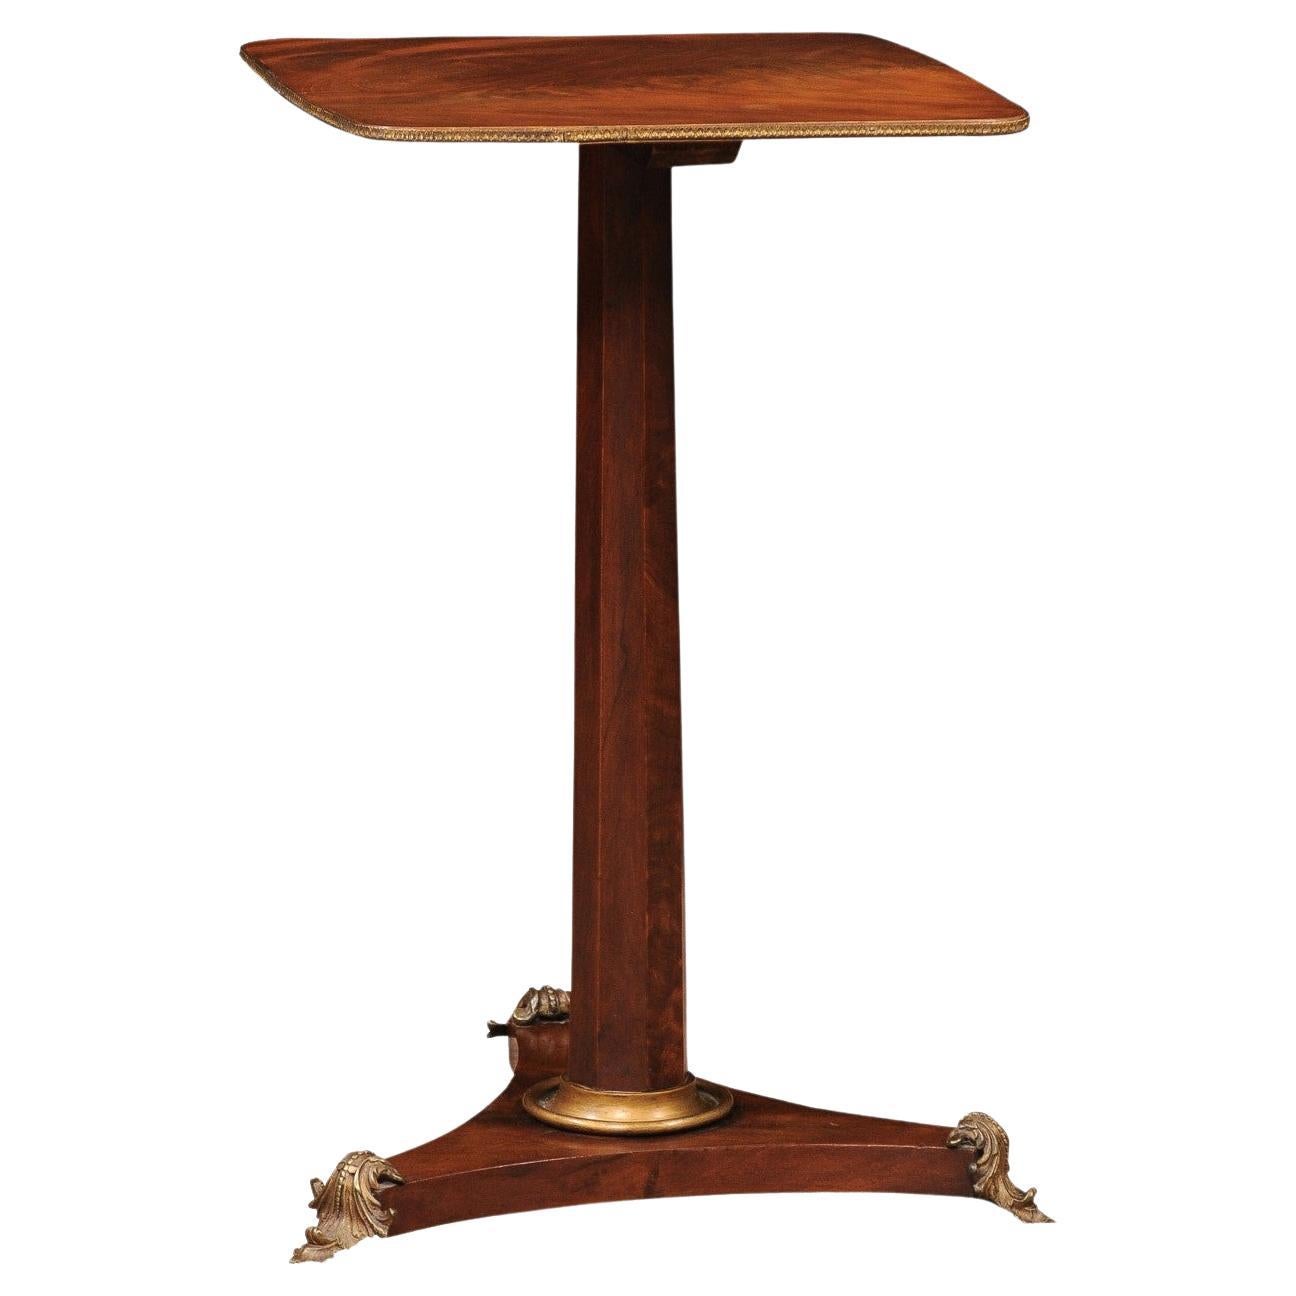 19th Century Continental Square Mahogany Drink Table with Ormalu Mounts For Sale